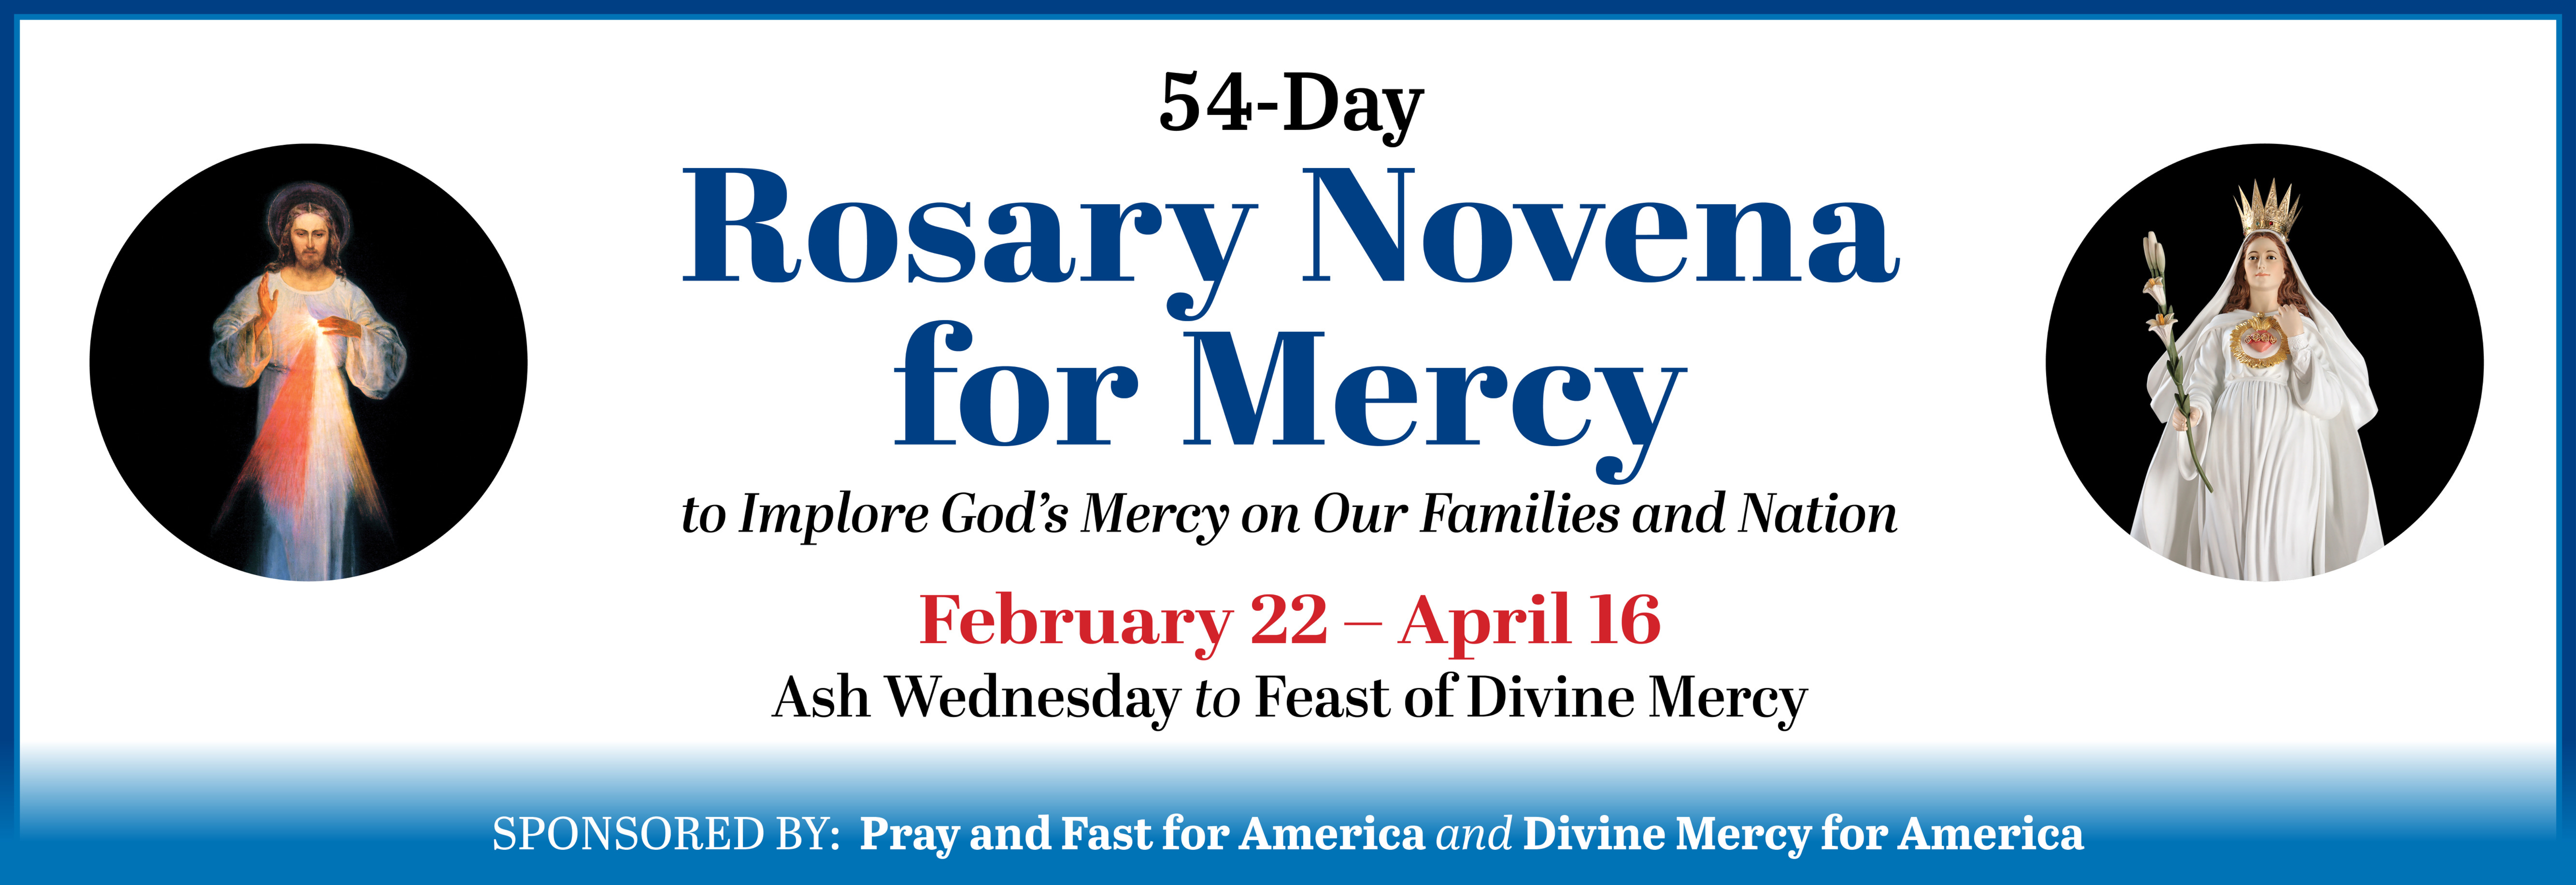 54-Day Rosary Novena for Mercy: Feb. 22 to April 16, 2023